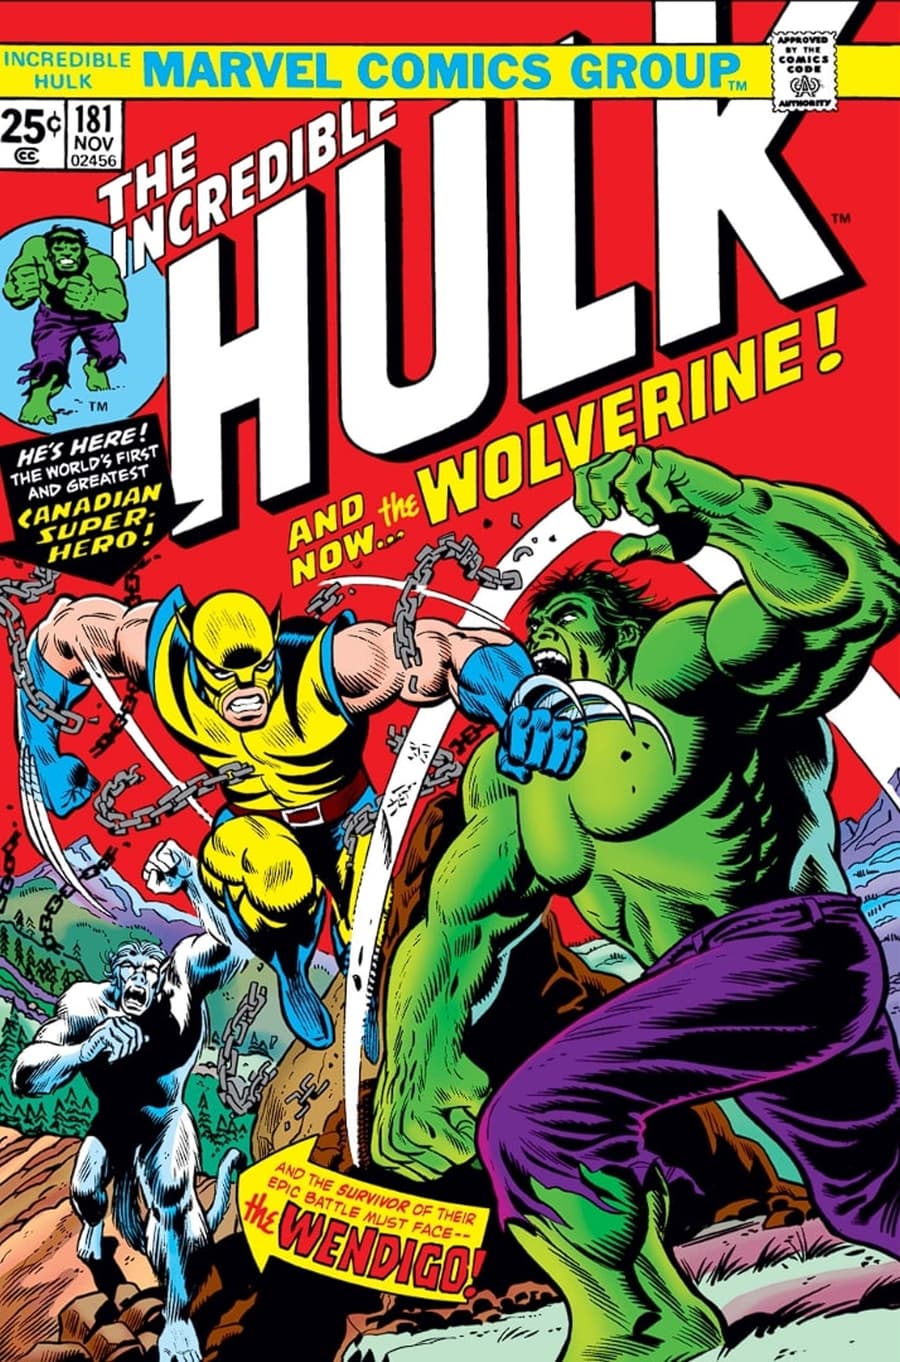 INCREDIBLE HULK (1962) #181 cover by Herb Trimpe